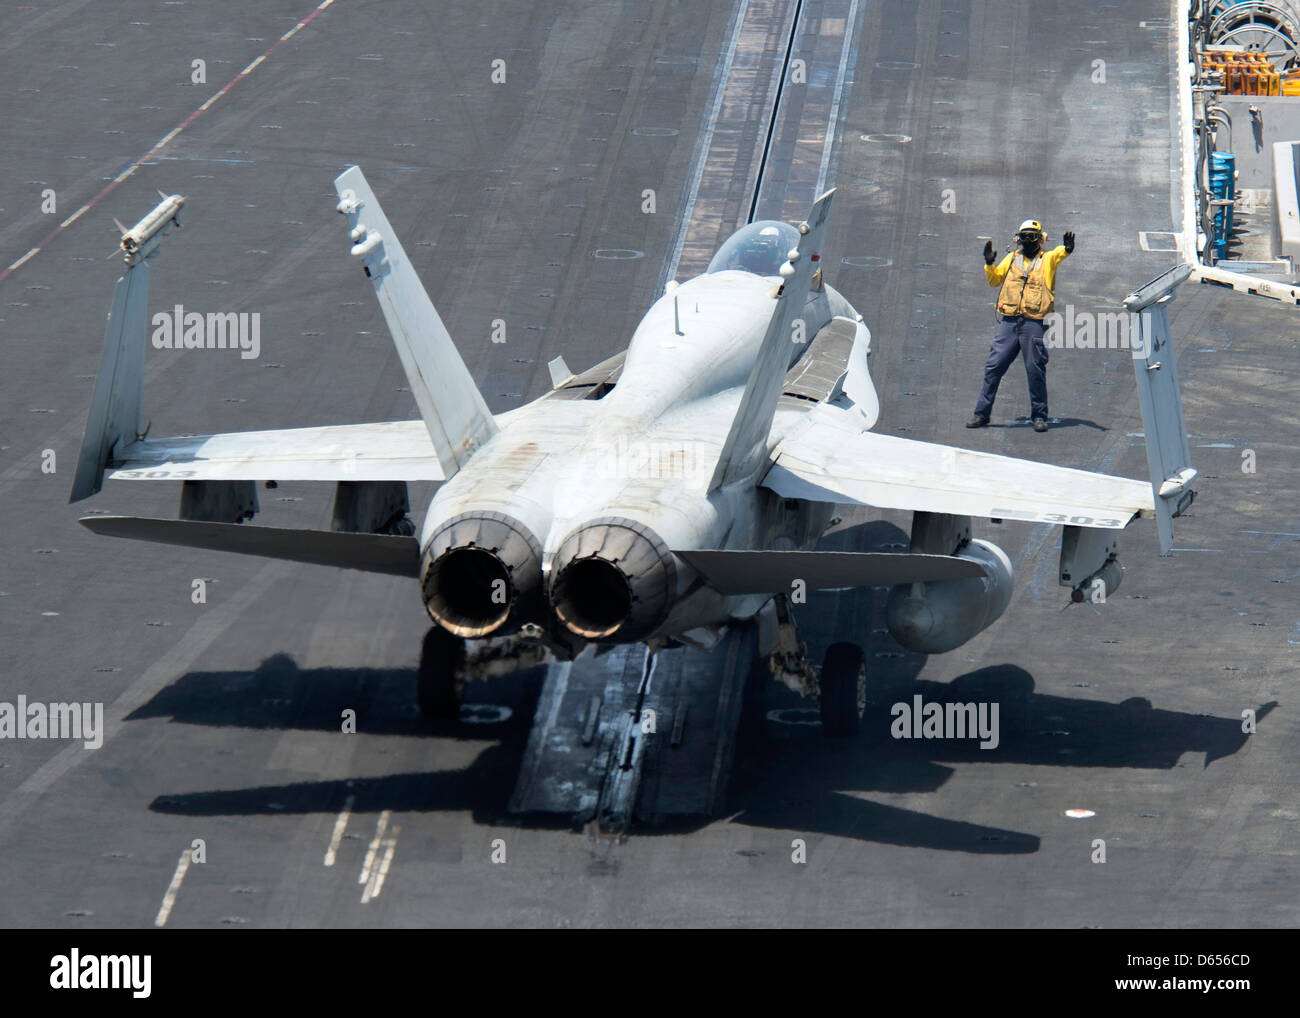 A US Navy plane director guides an F/A-18C Hornet onto a catapult for take off on the flight deck of aircraft carrier USS Dwight D. Eisenhower April 9, 201 in the North Arabian Sea. Stock Photo